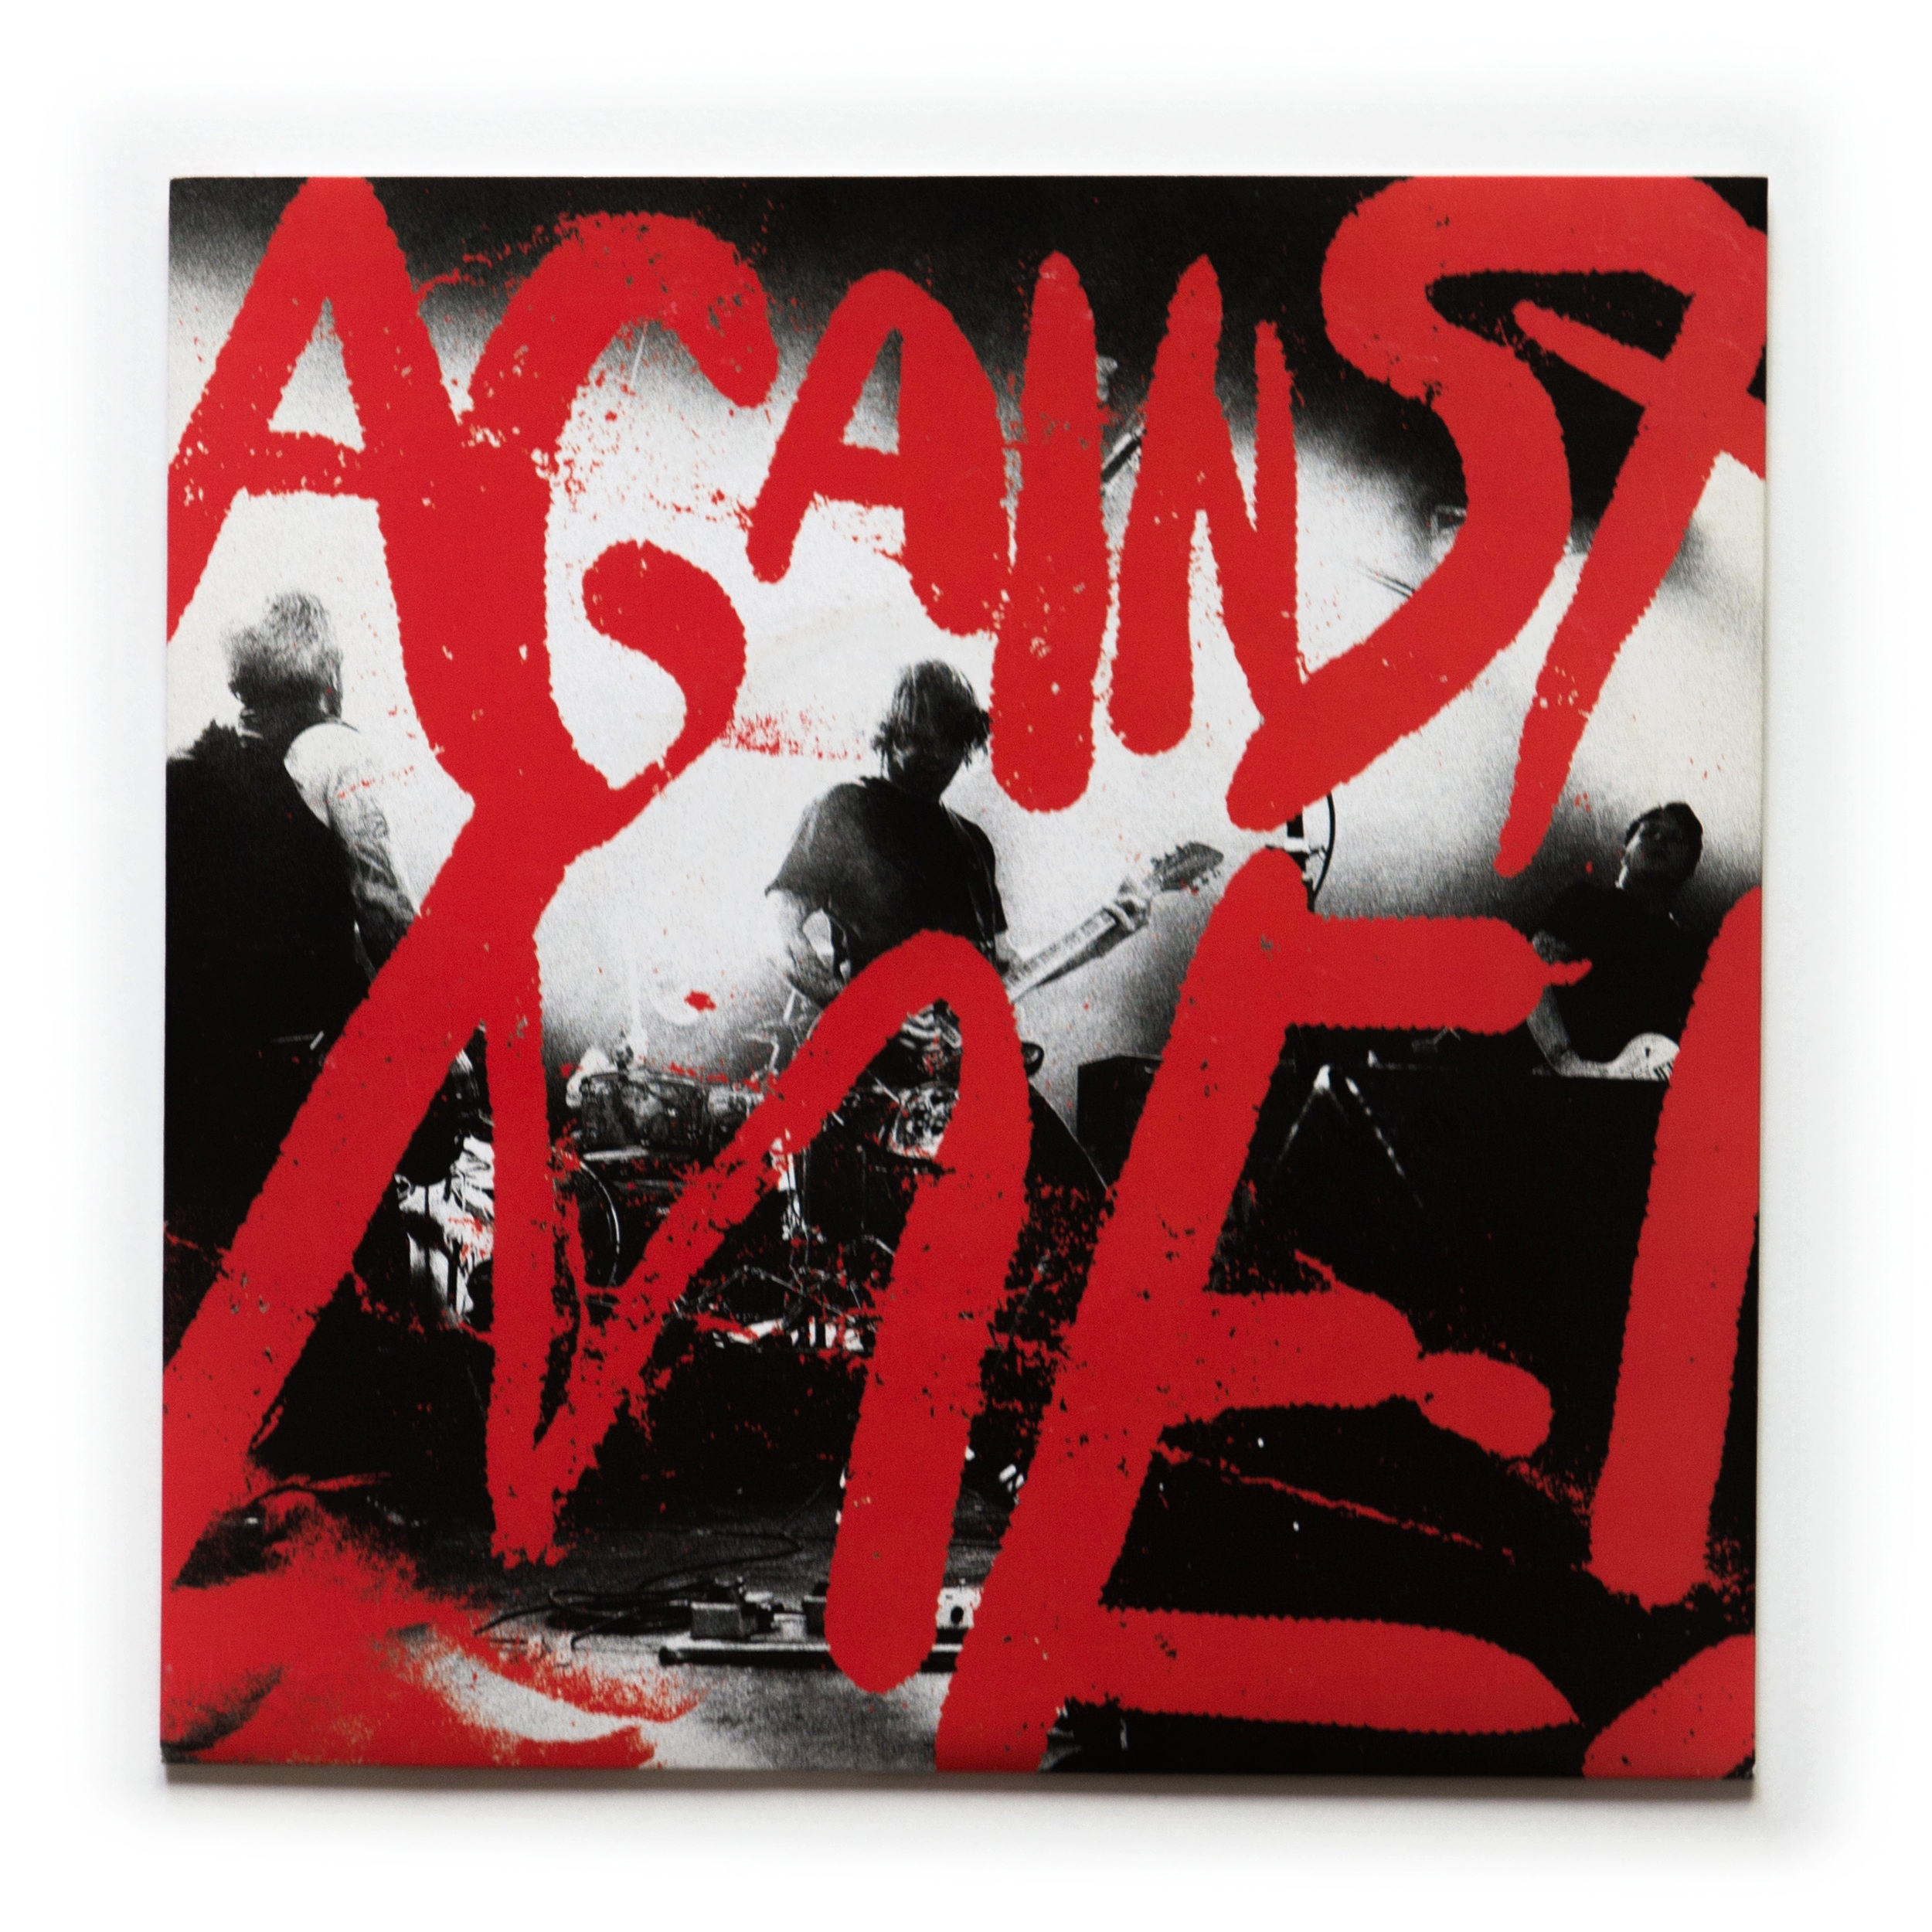  Against Me!&nbsp; Russian Spies &nbsp;2011 (Sabot Productions) 